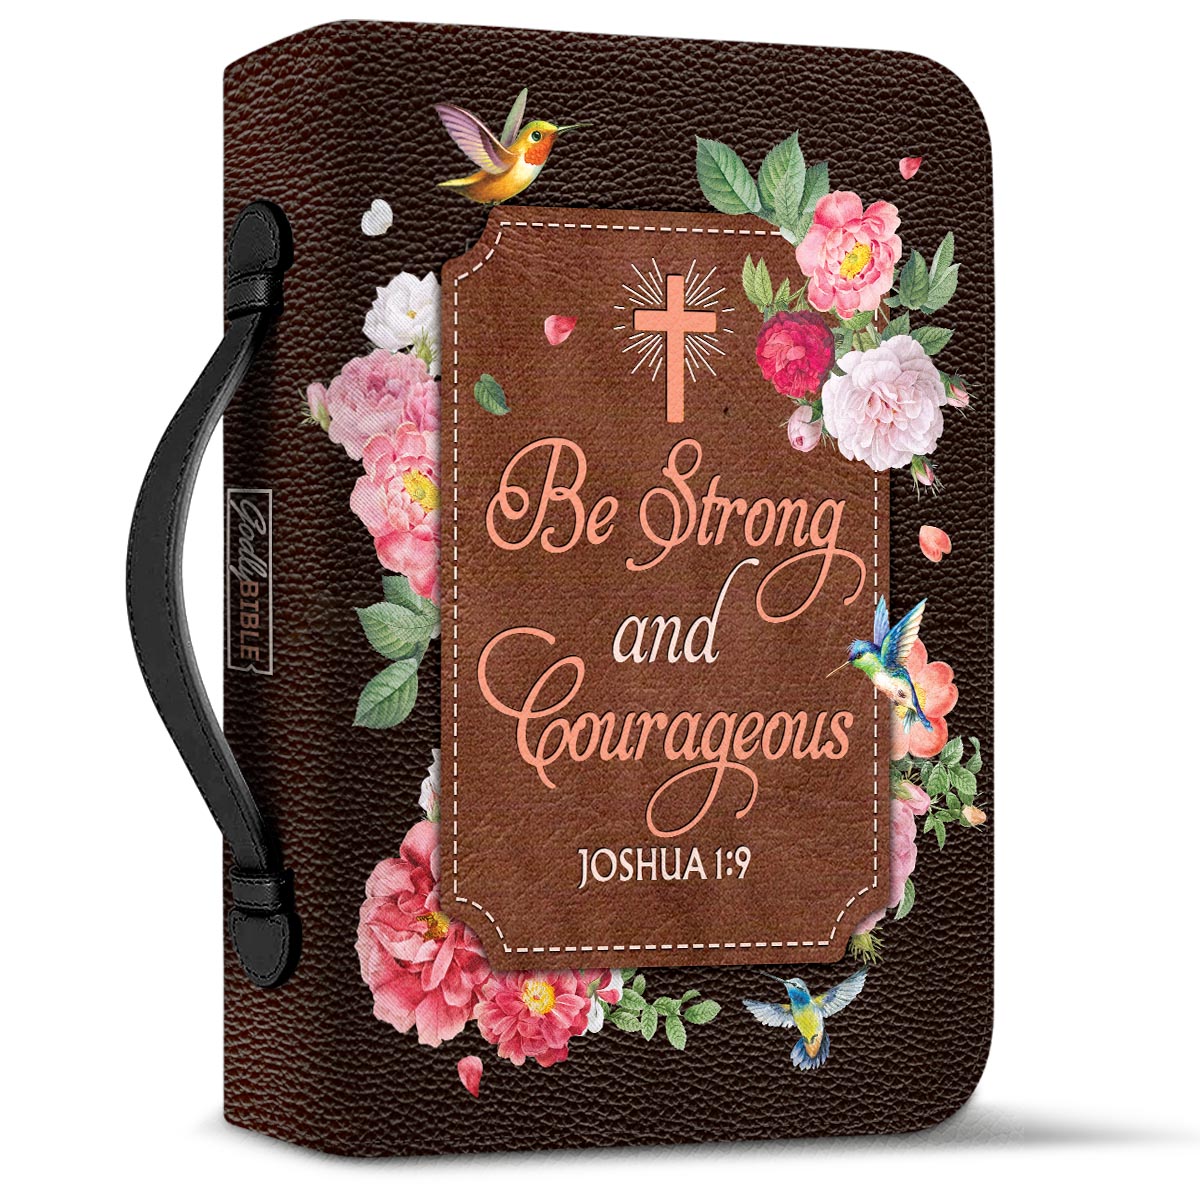  Personalized Bible Cover - Be Strong And Courageous Joshua 1 9 Hummingbird Vintage Flower Bible Cover for Christians